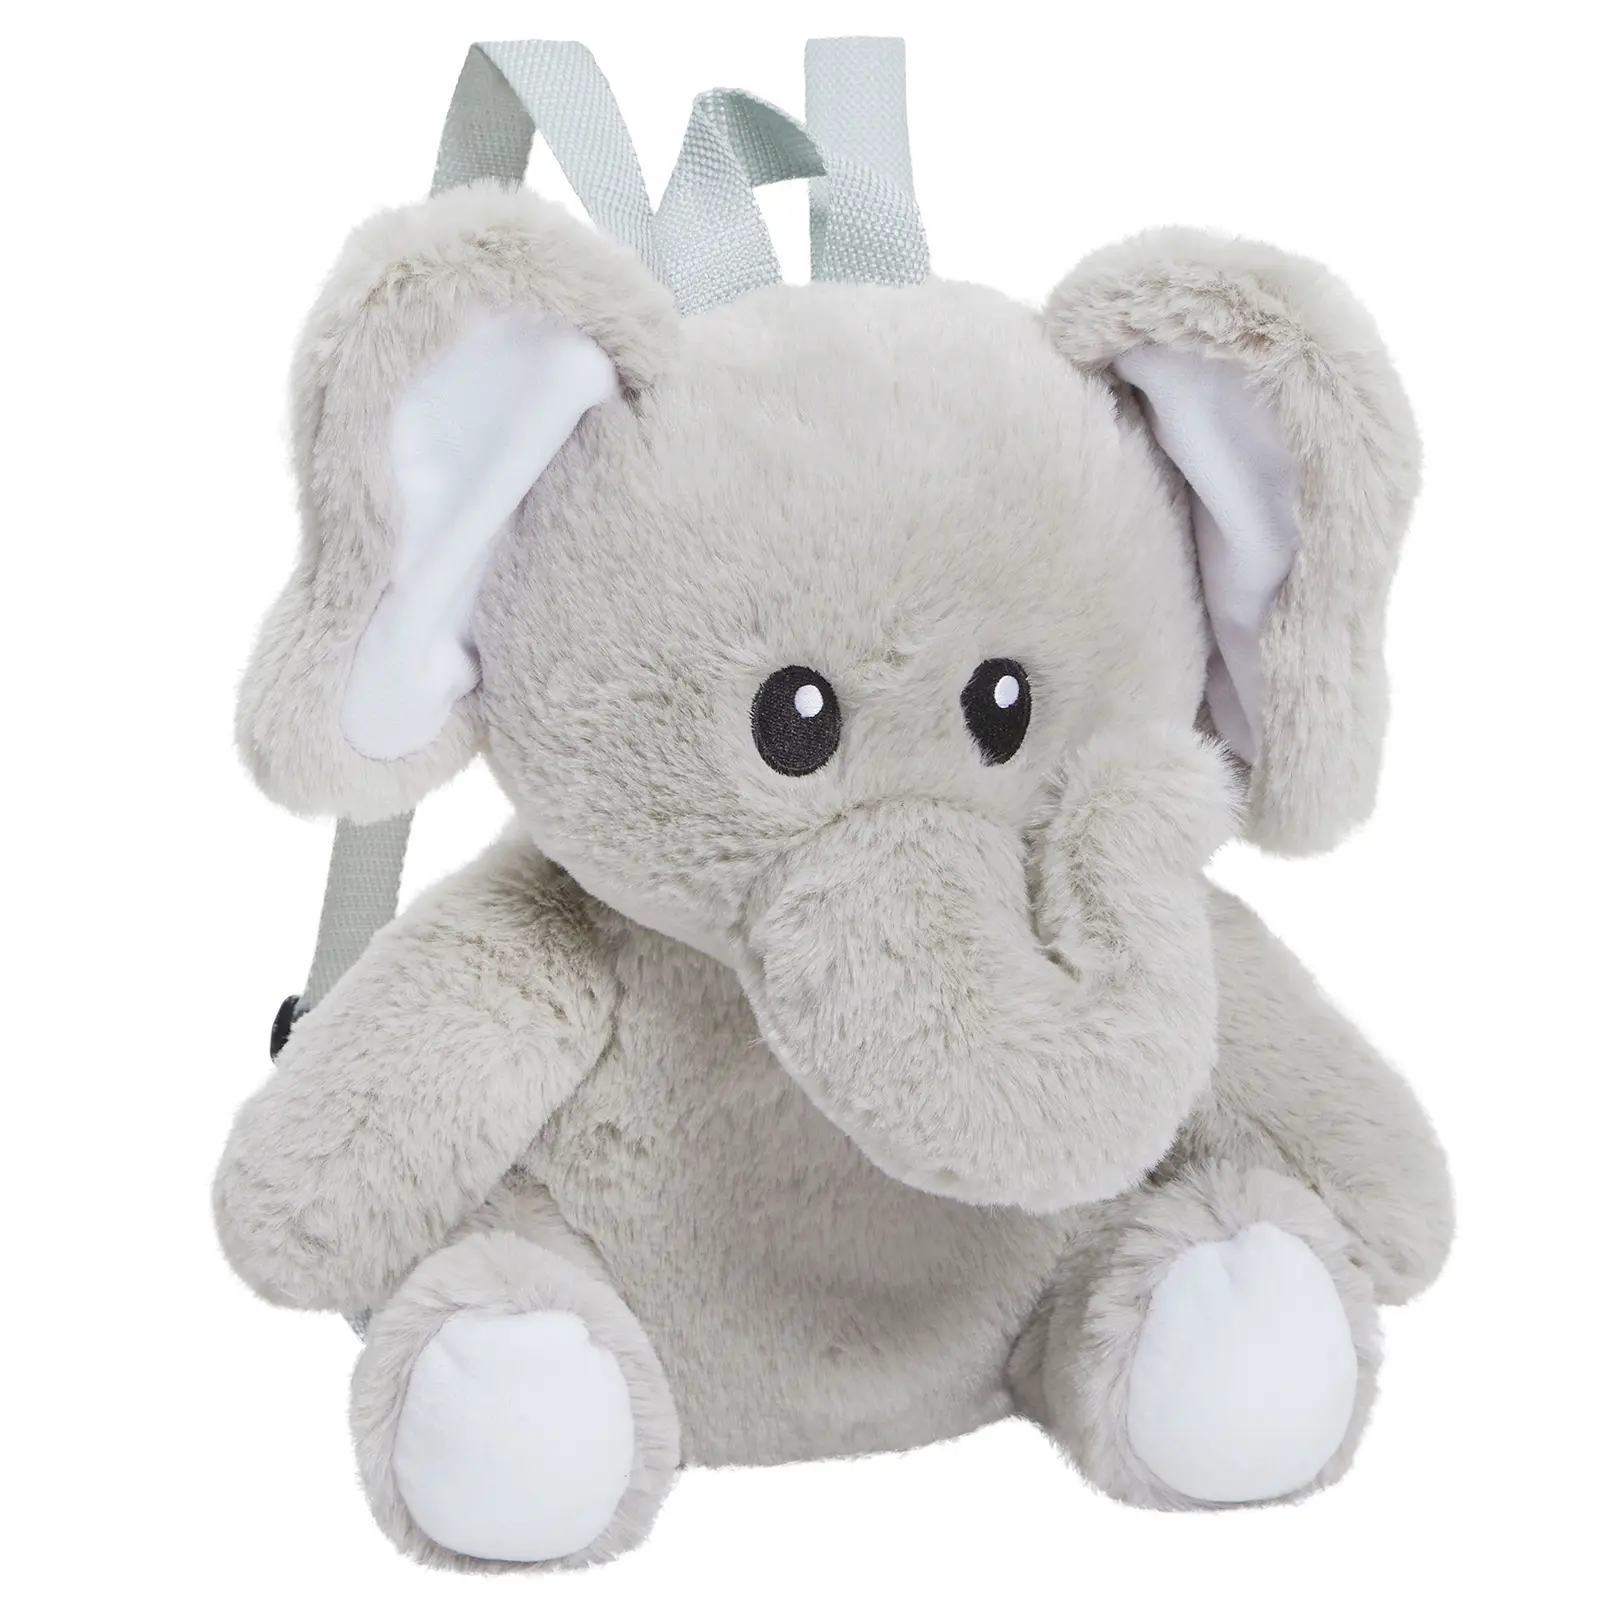 Hot selling new products plush gray elephant backpack children's gift throw pillow doll